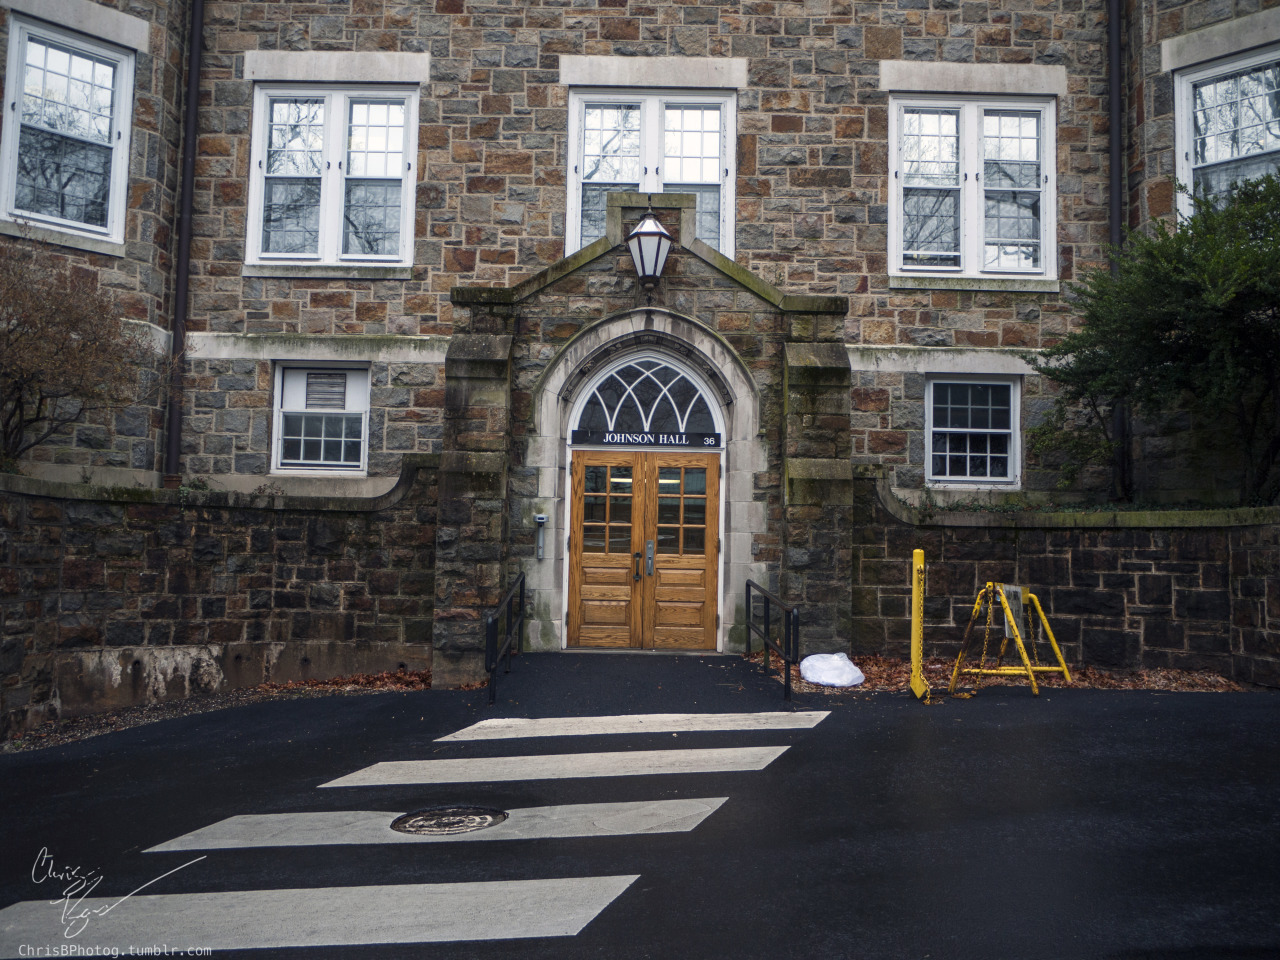 Few pictures today. It was really foggy, so lots of grey/wet pictures.
Here&rsquo;s Johnson Hall